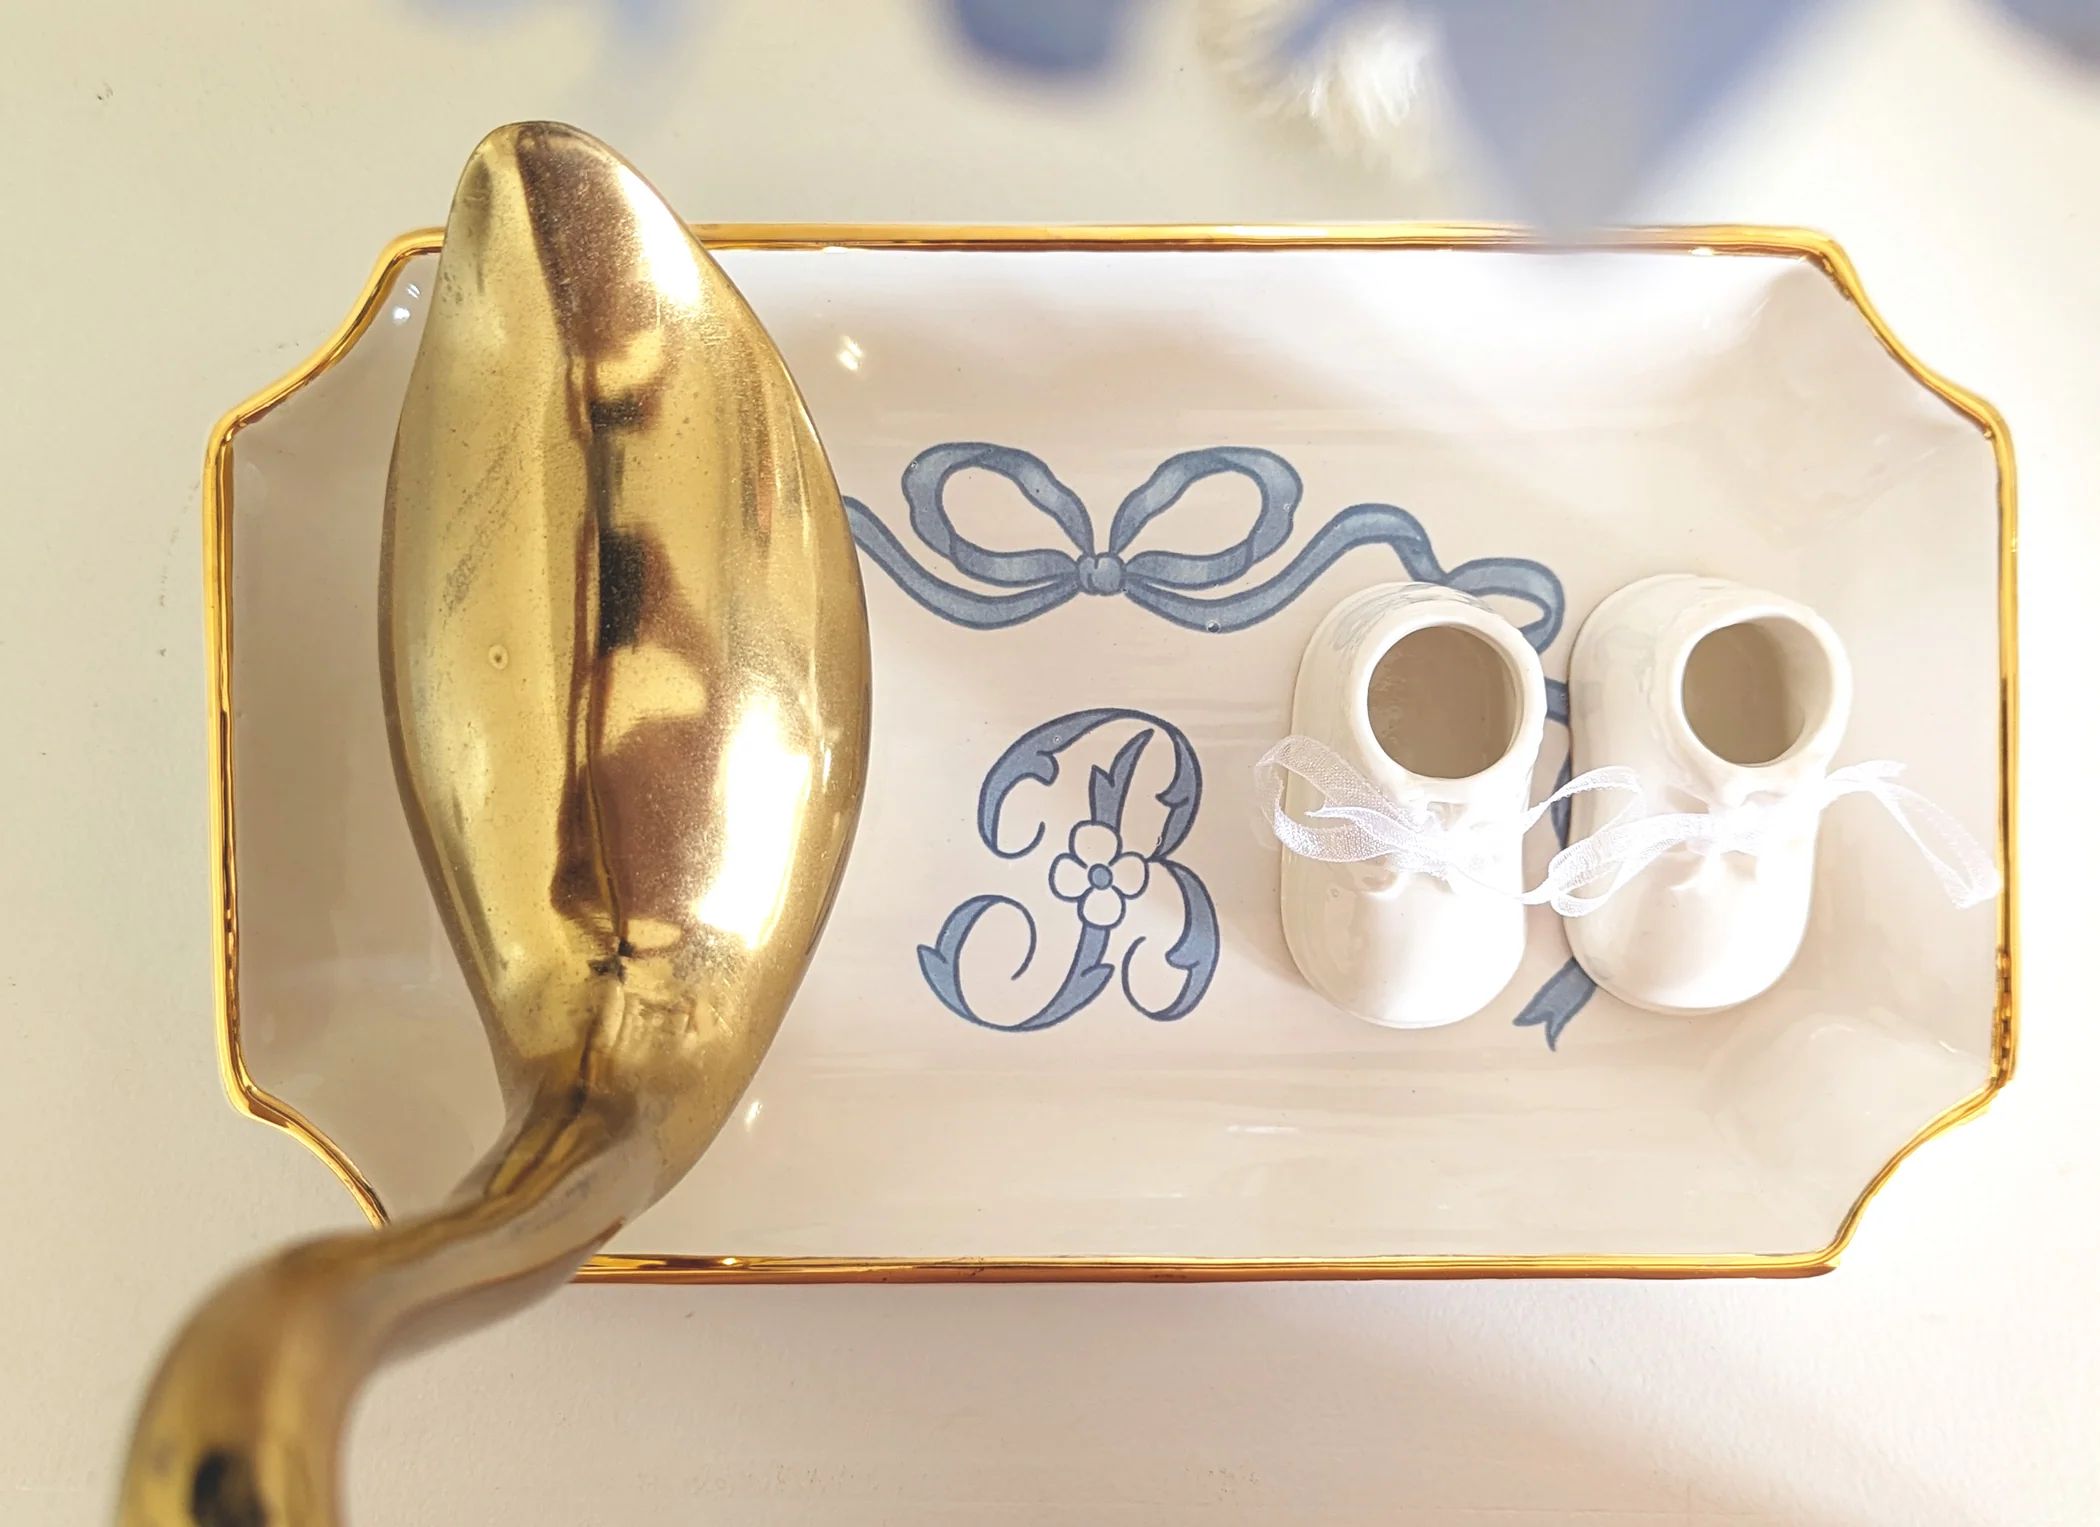 Lo Home x Chapple Chandler Keepsake Trays with Bow, Monogram and 22K Gold Accent | Lo Home by Lauren Haskell Designs